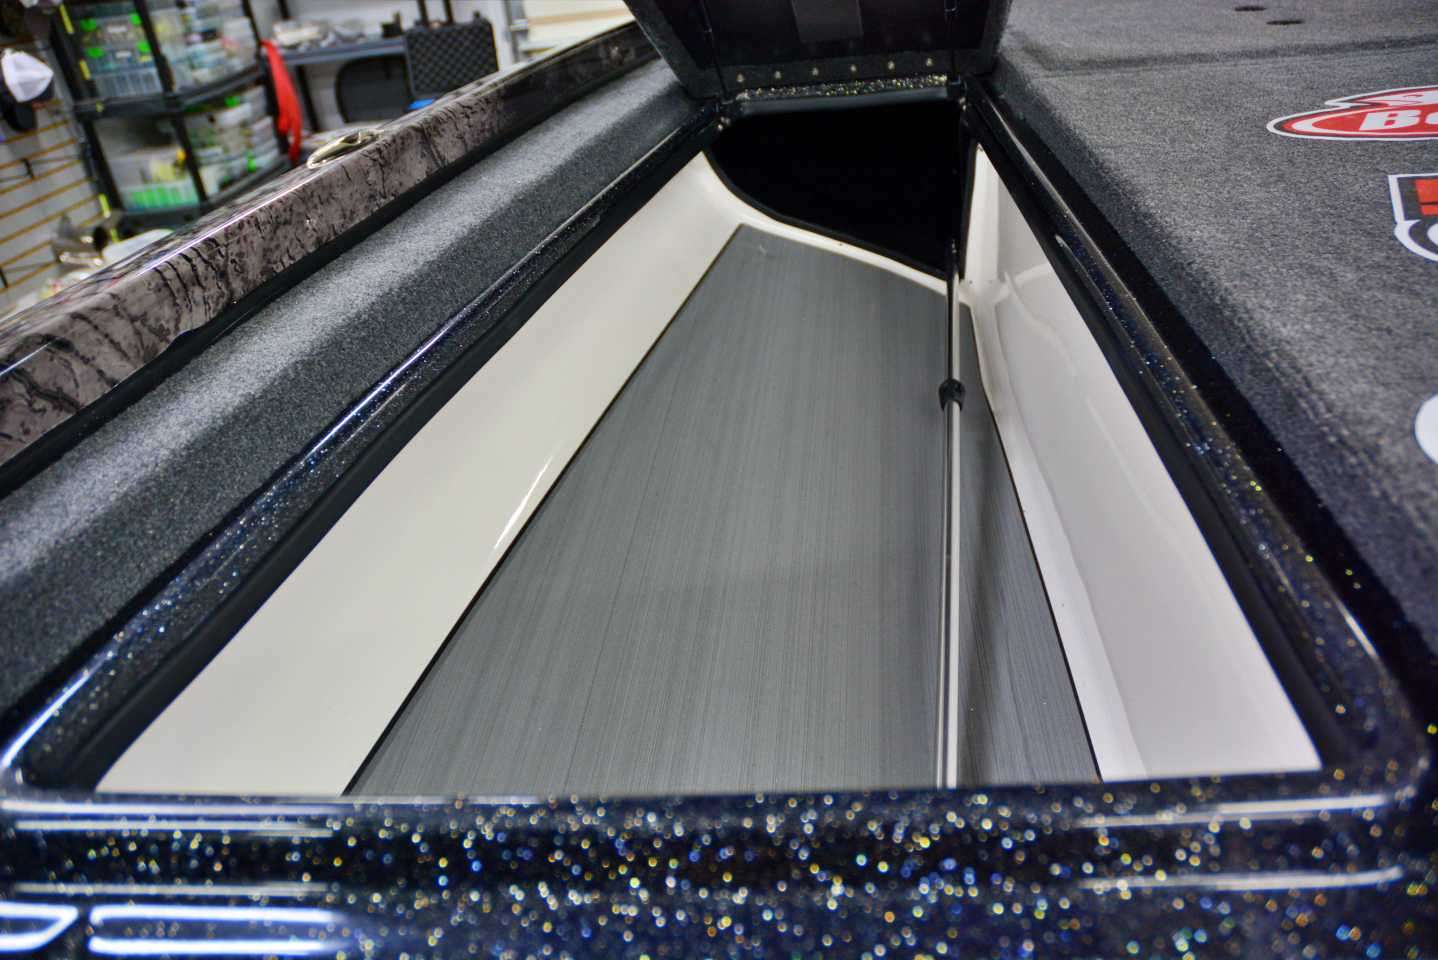 The port rod storage features SeaDek flooring for quick drying of wet combos. Atkins removes the rod organizer in favor of using Rod Gloves. This setup allows him to put all the rods he needs in the compartment.  